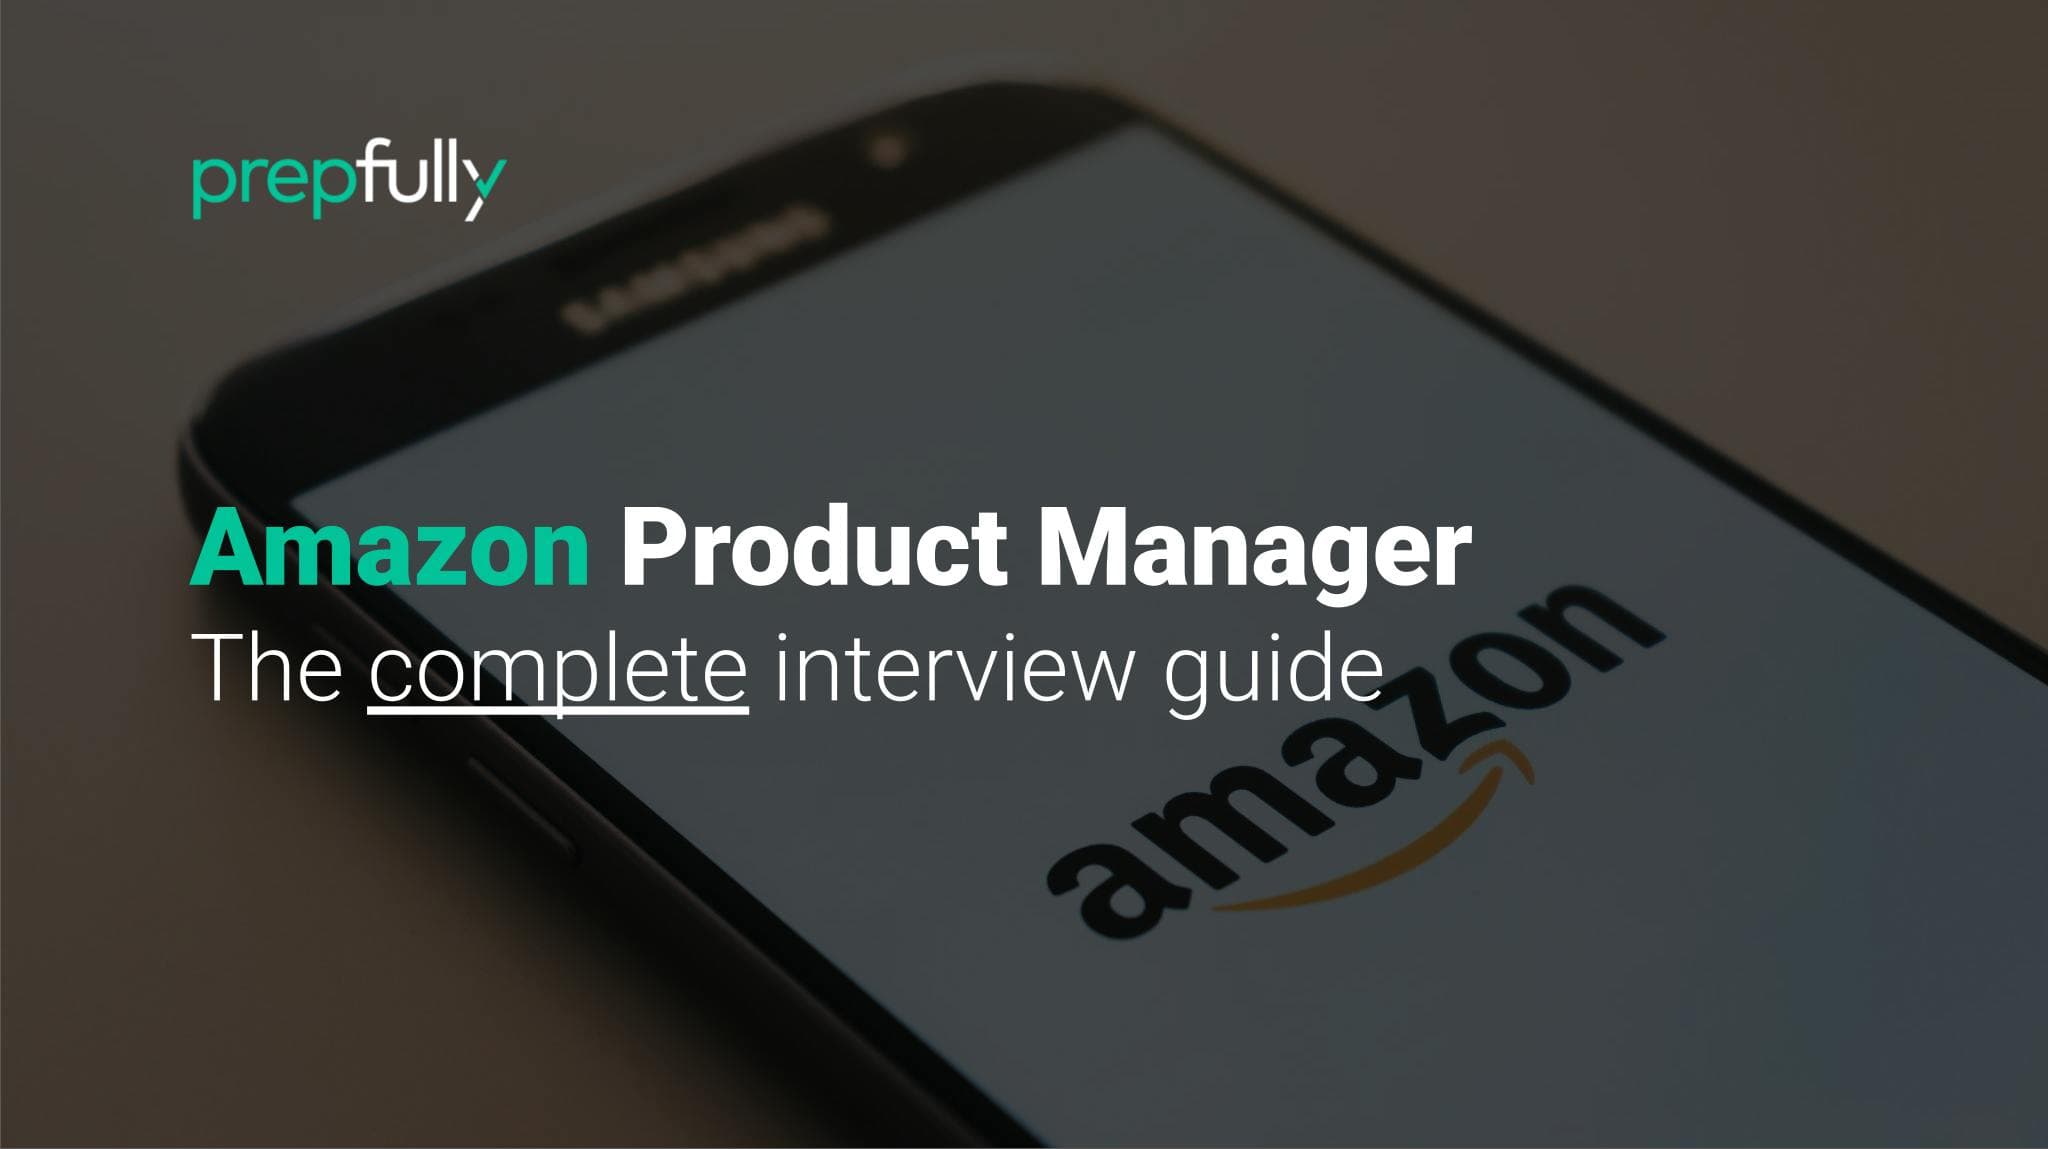 Interview guide for Amazon Product Manager